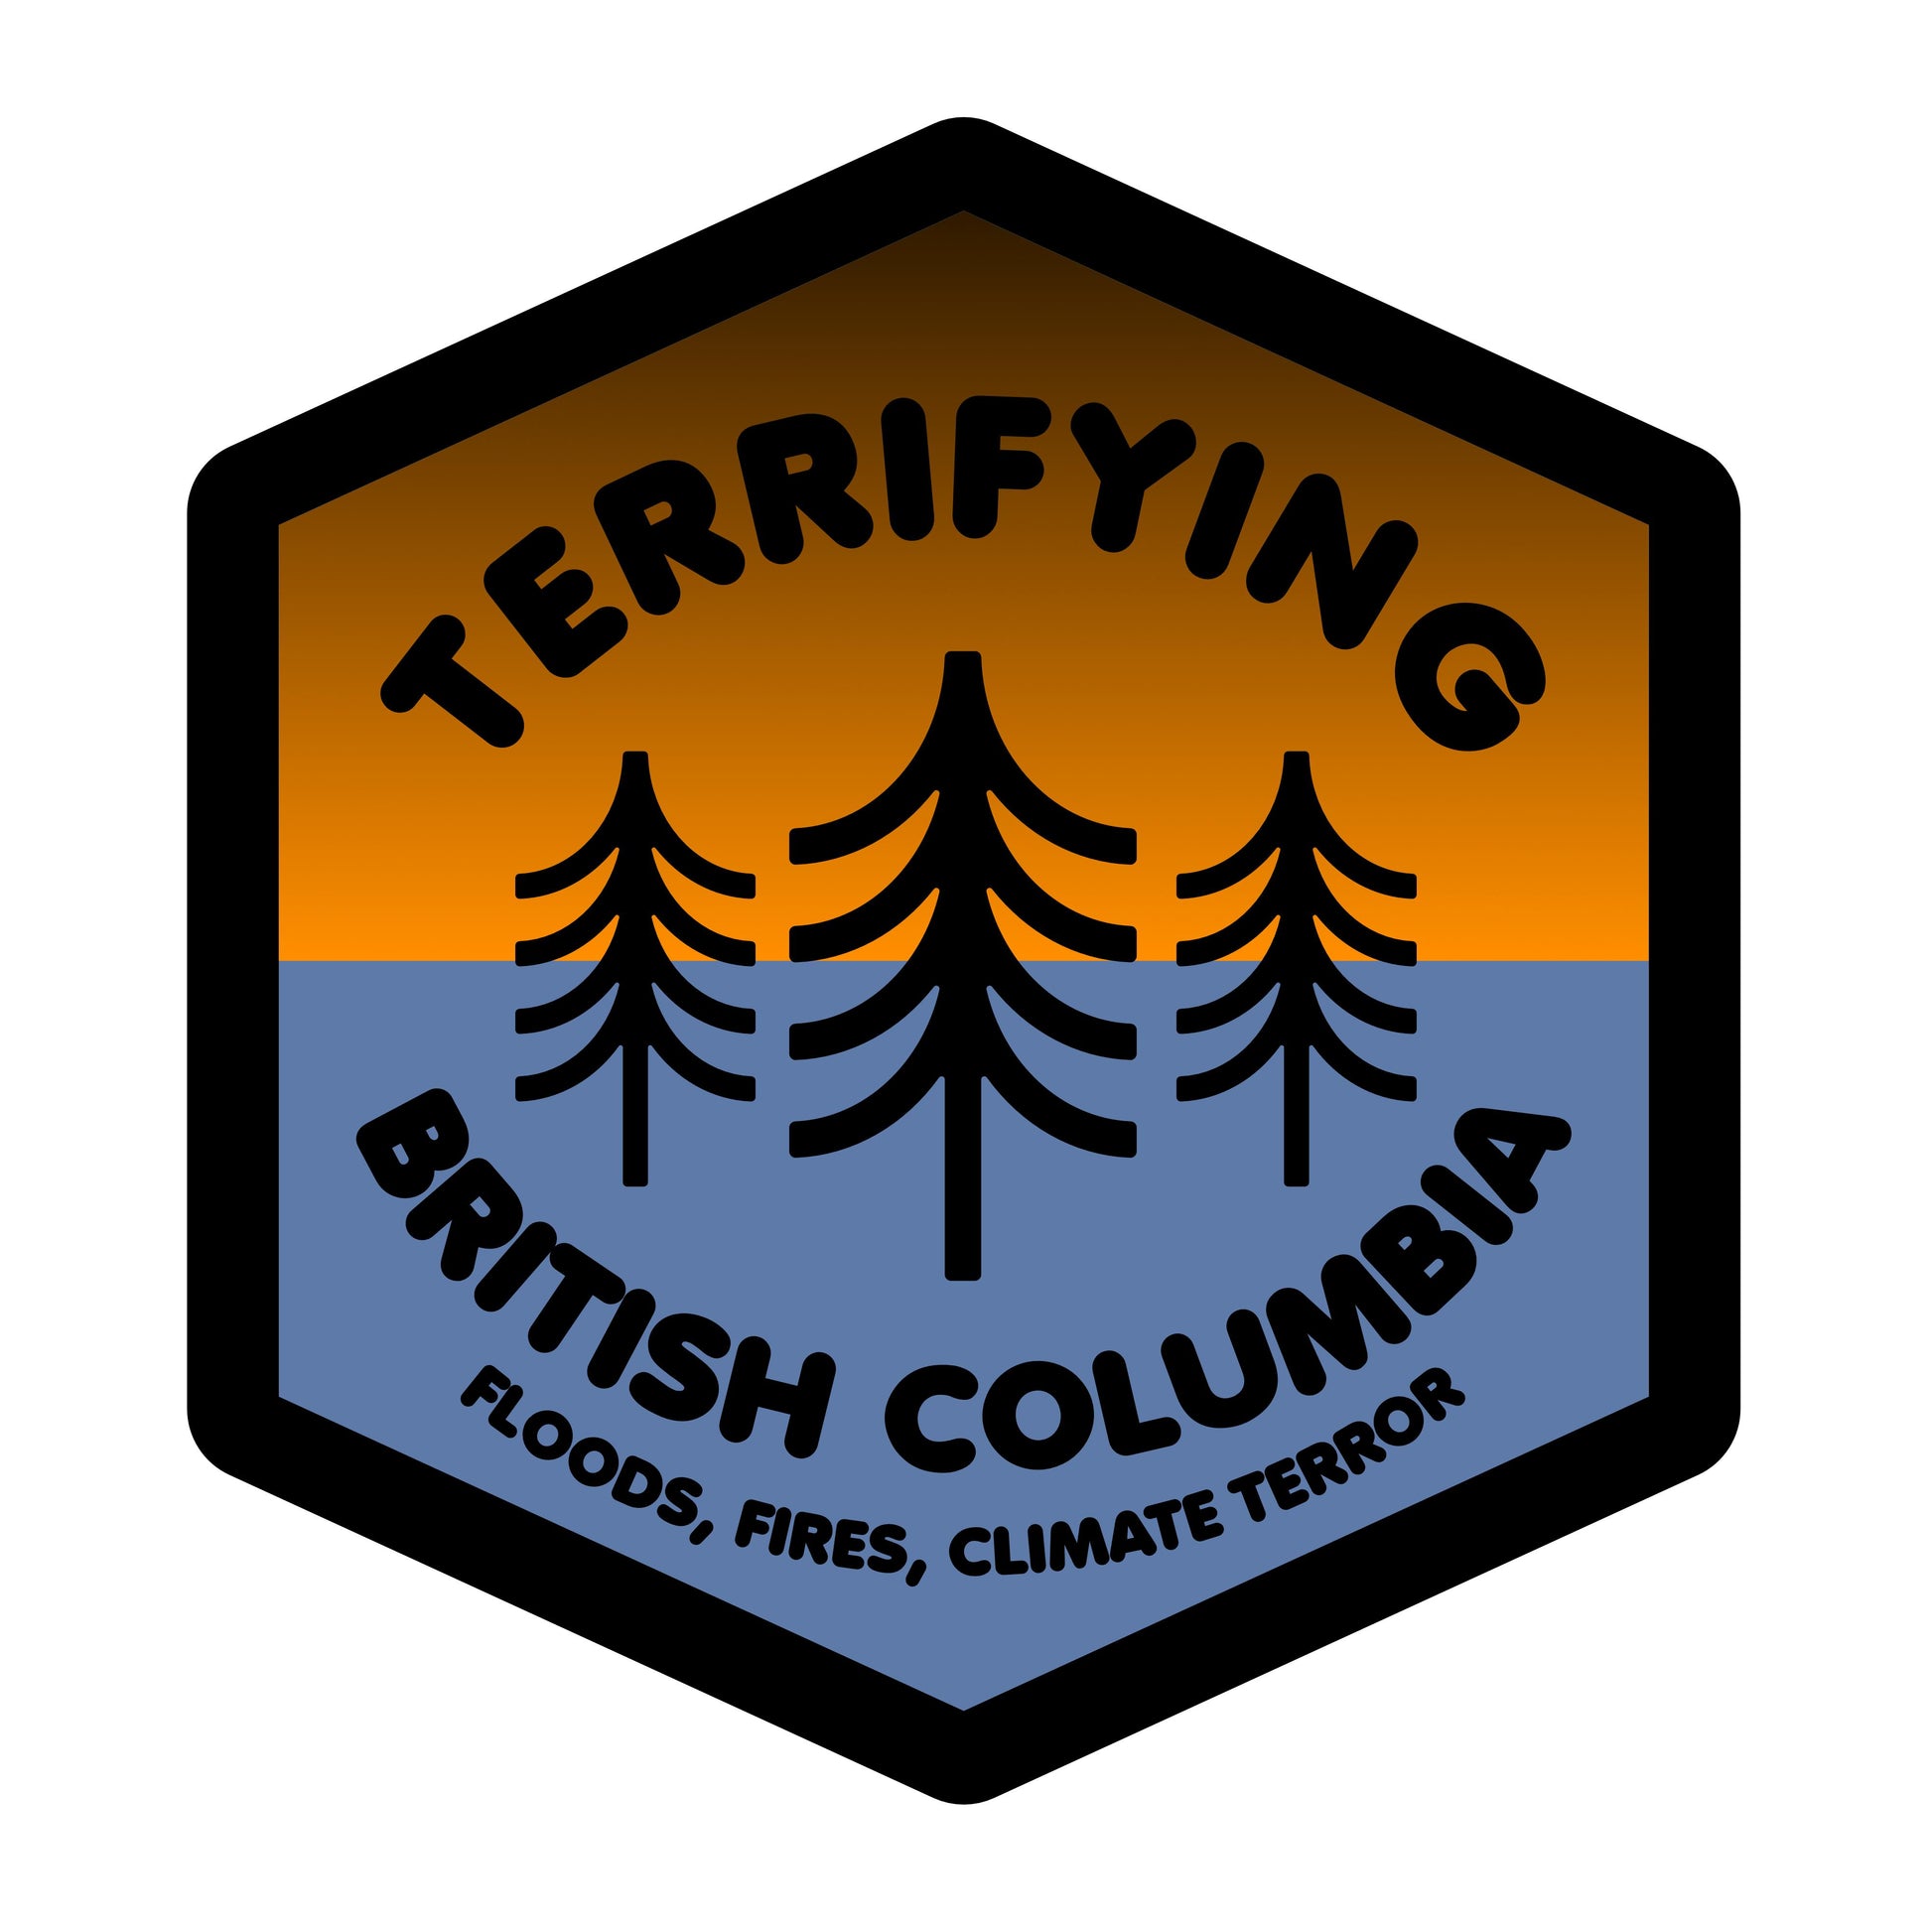 Orange and blue hexagon sticker with black border and the words "terrifying british columbia fires, floods, climate terror" and minimalist burnt trees